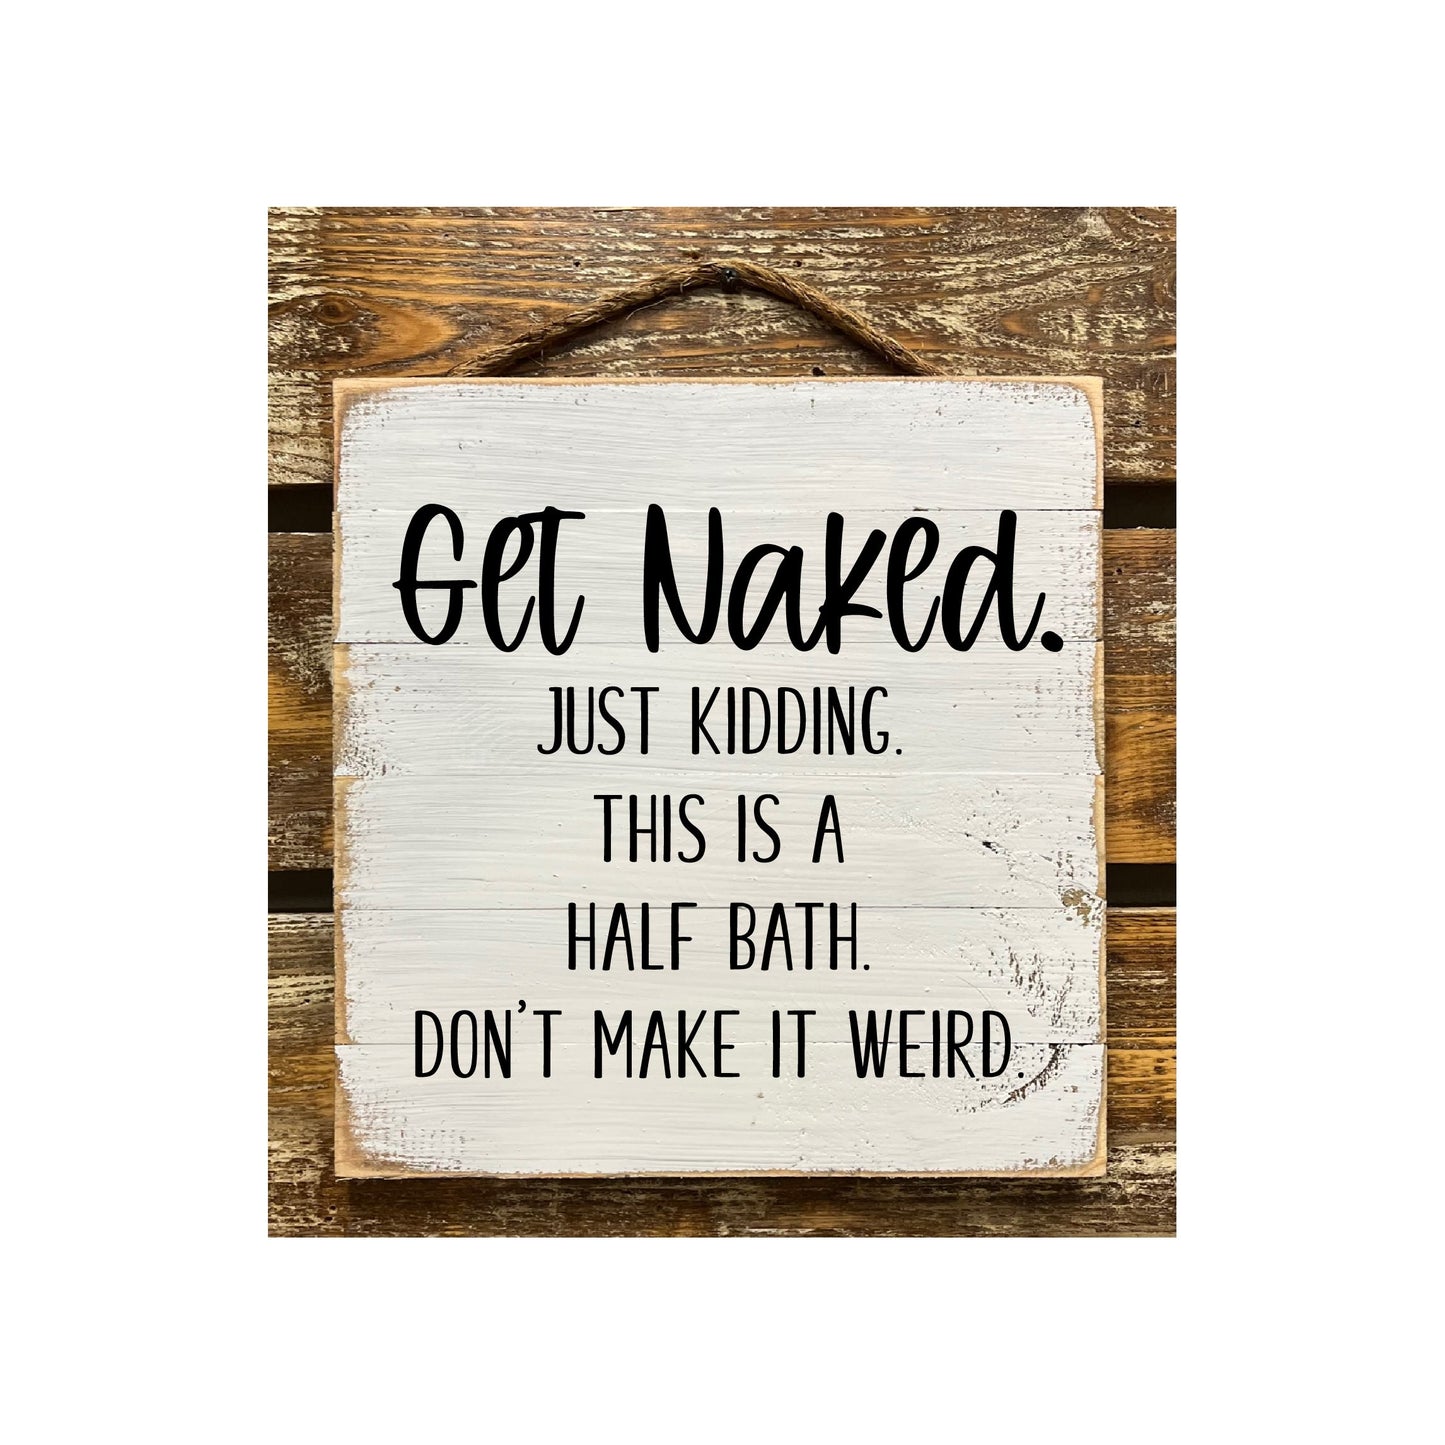 Get Naked Just Kidding This Is A Half Bath...